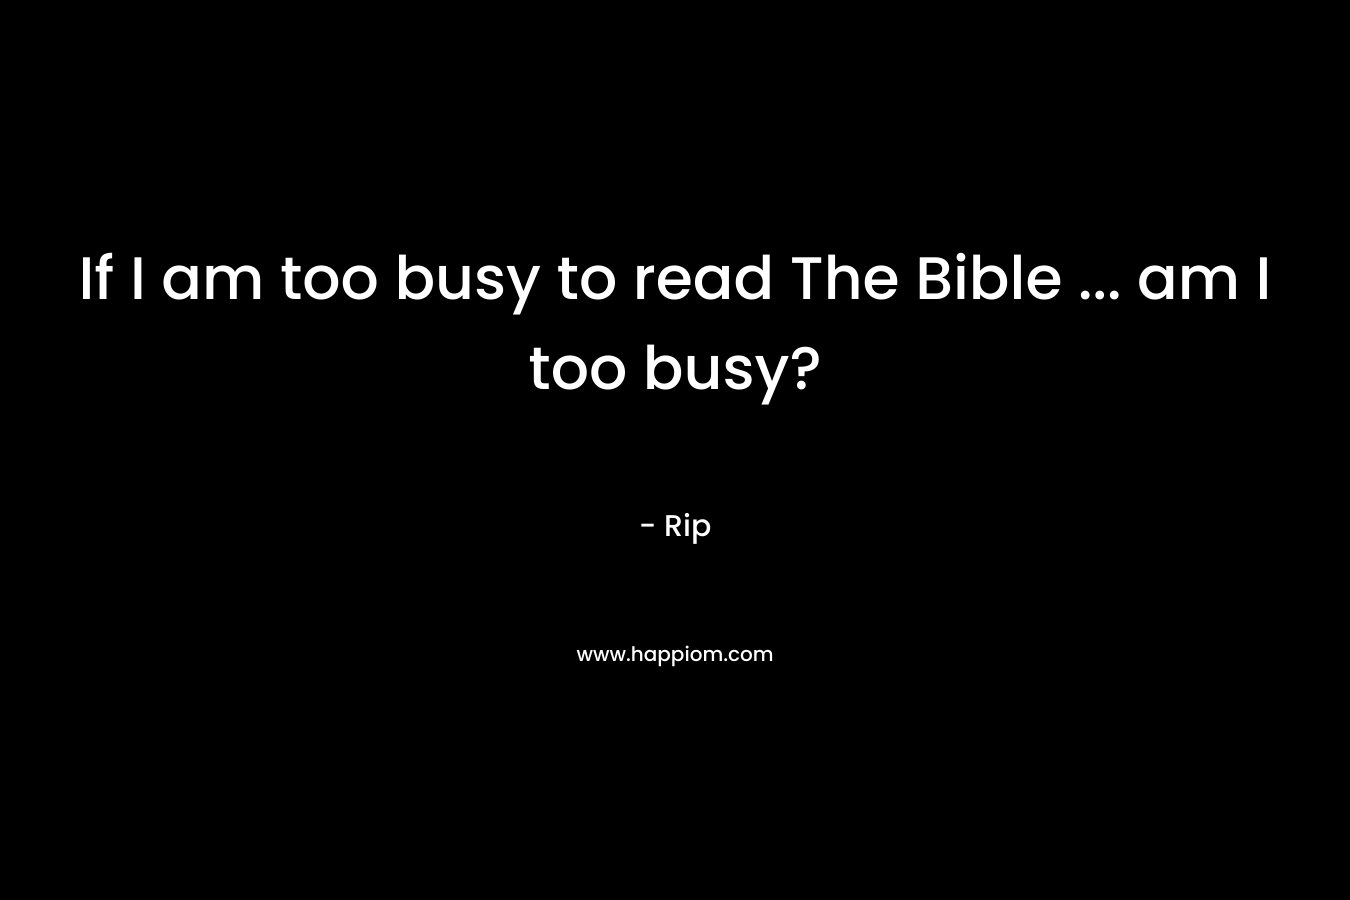 If I am too busy to read The Bible ... am I too busy?